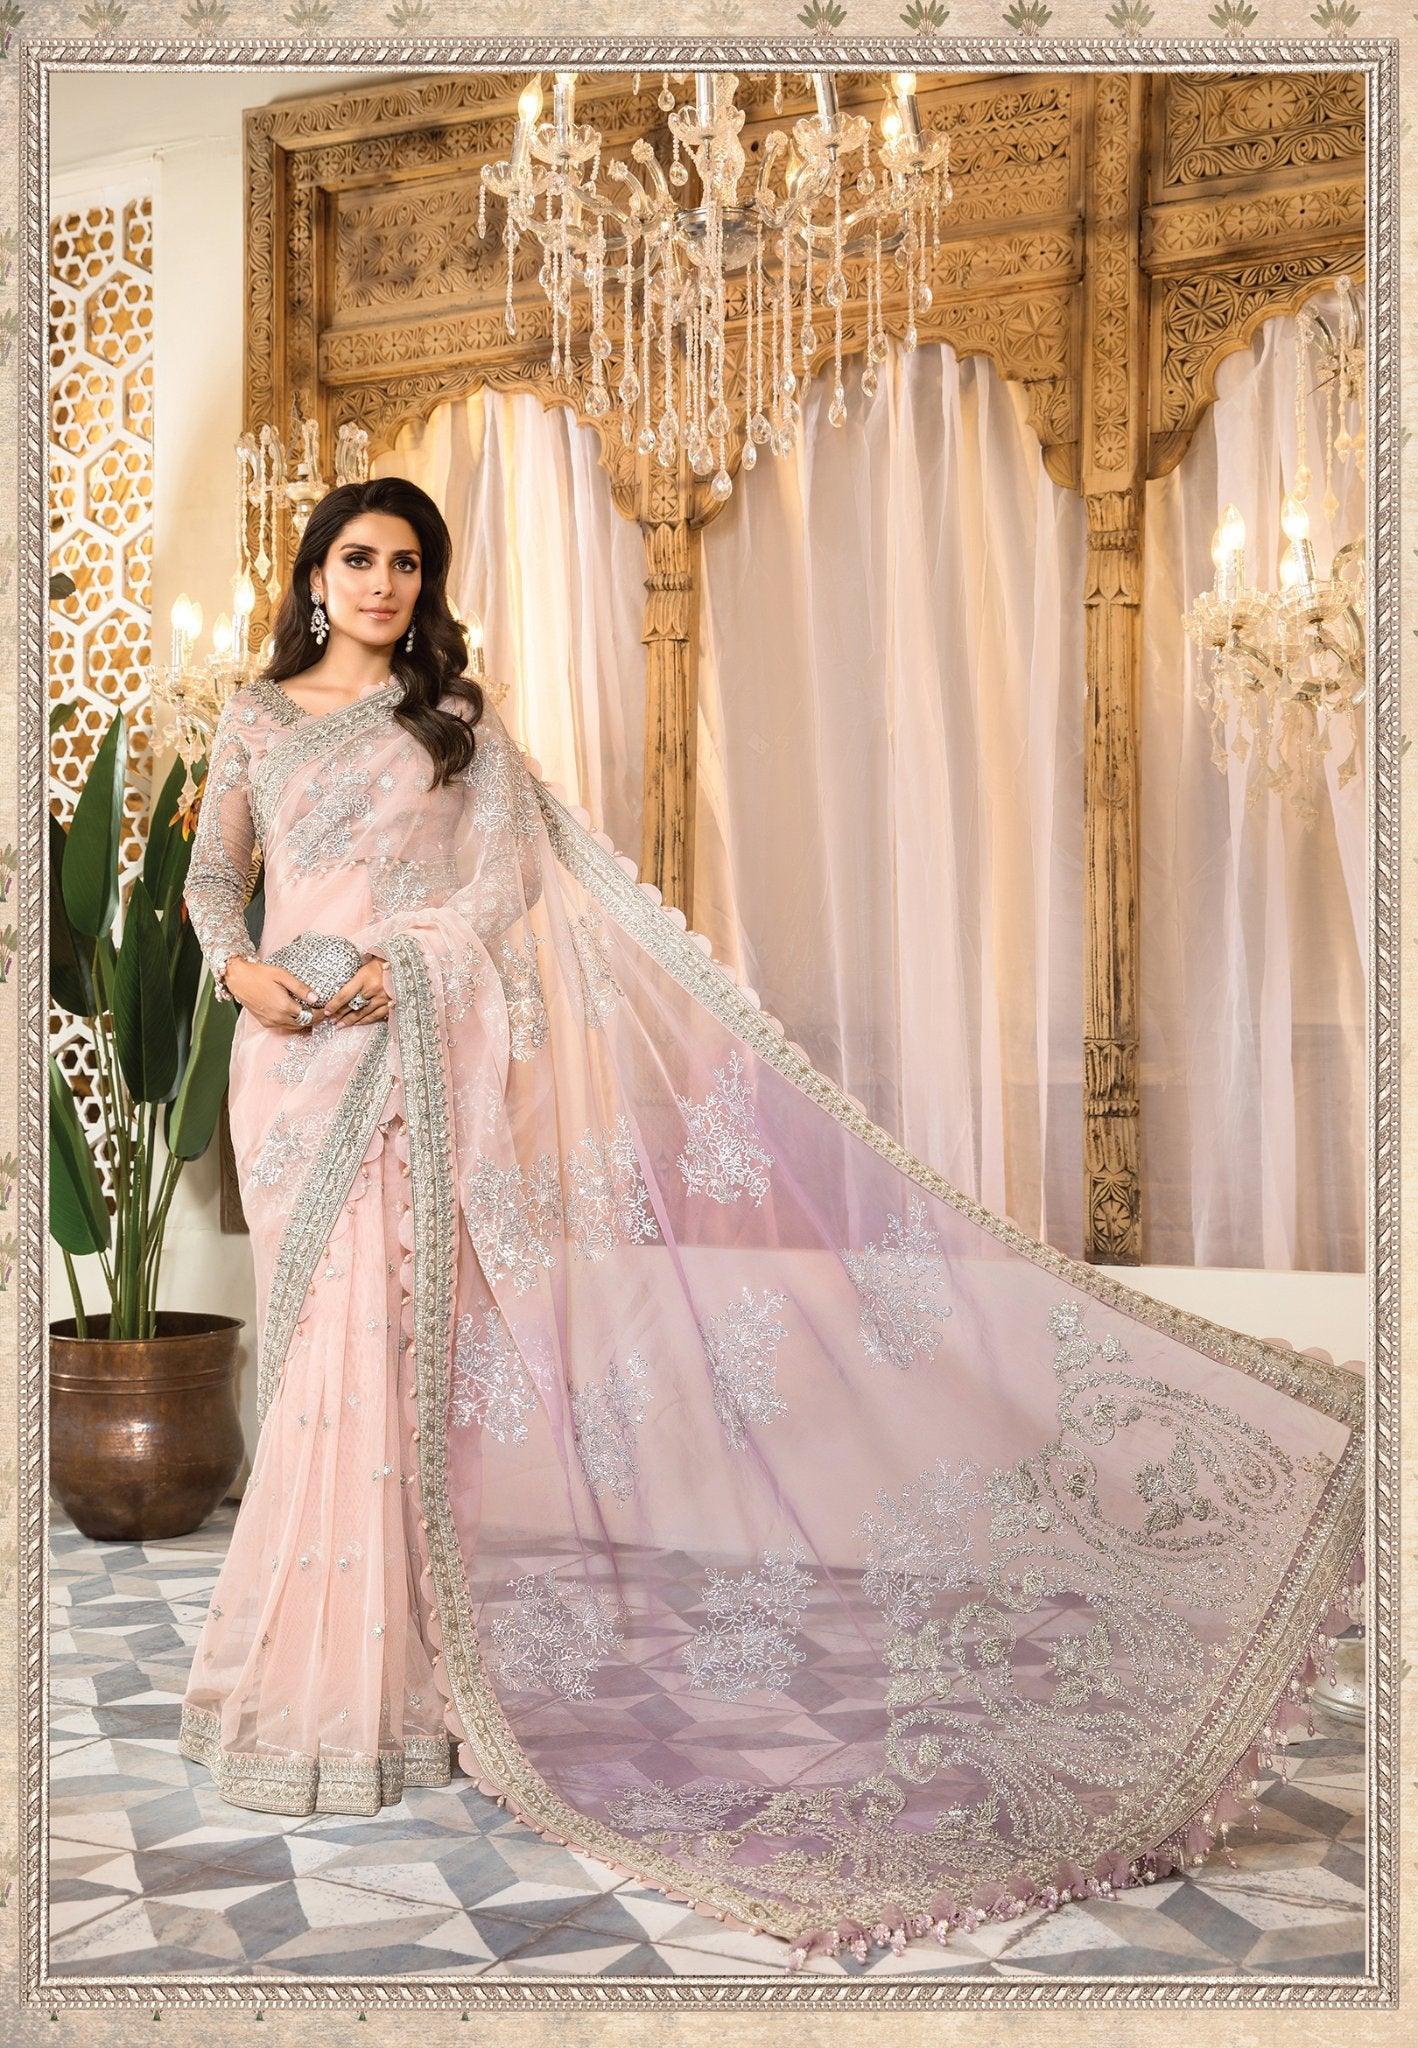 Maria.B - Mbroidered Hertiage Edition'22- Rose Pink and Lilac -D#04 - Maria.B - Mbroidered Hertiage Edition'22- Rose Pink and Lilac -D#04 - Shahana Collection